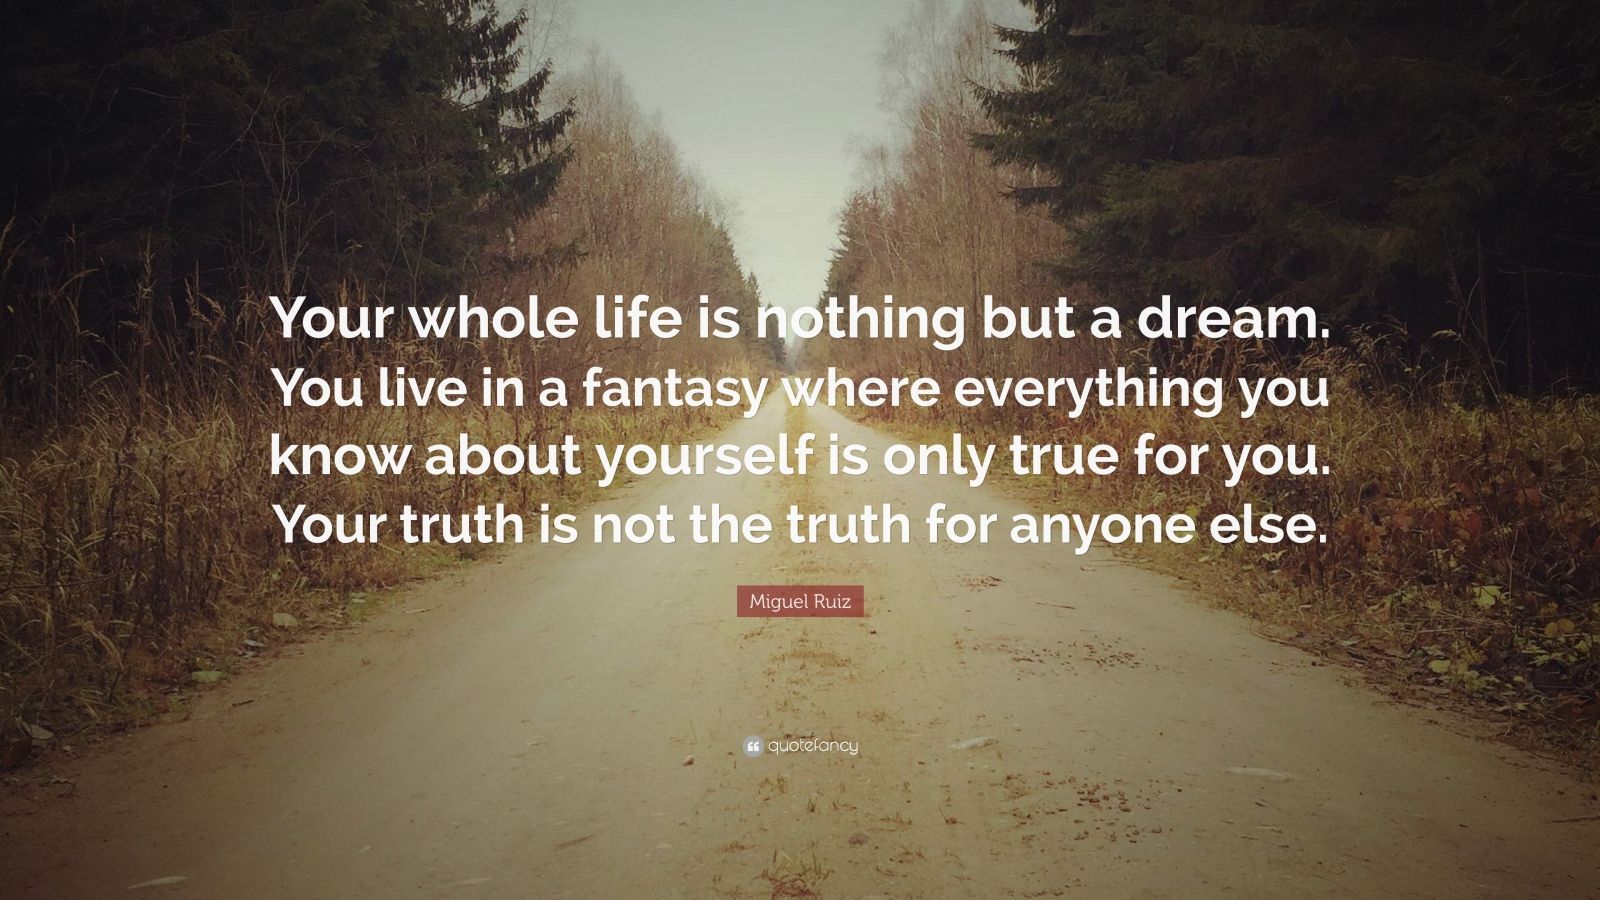 Miguel Ruiz Quote: "Your whole life is nothing but a dream. You live in a fantasy where ...